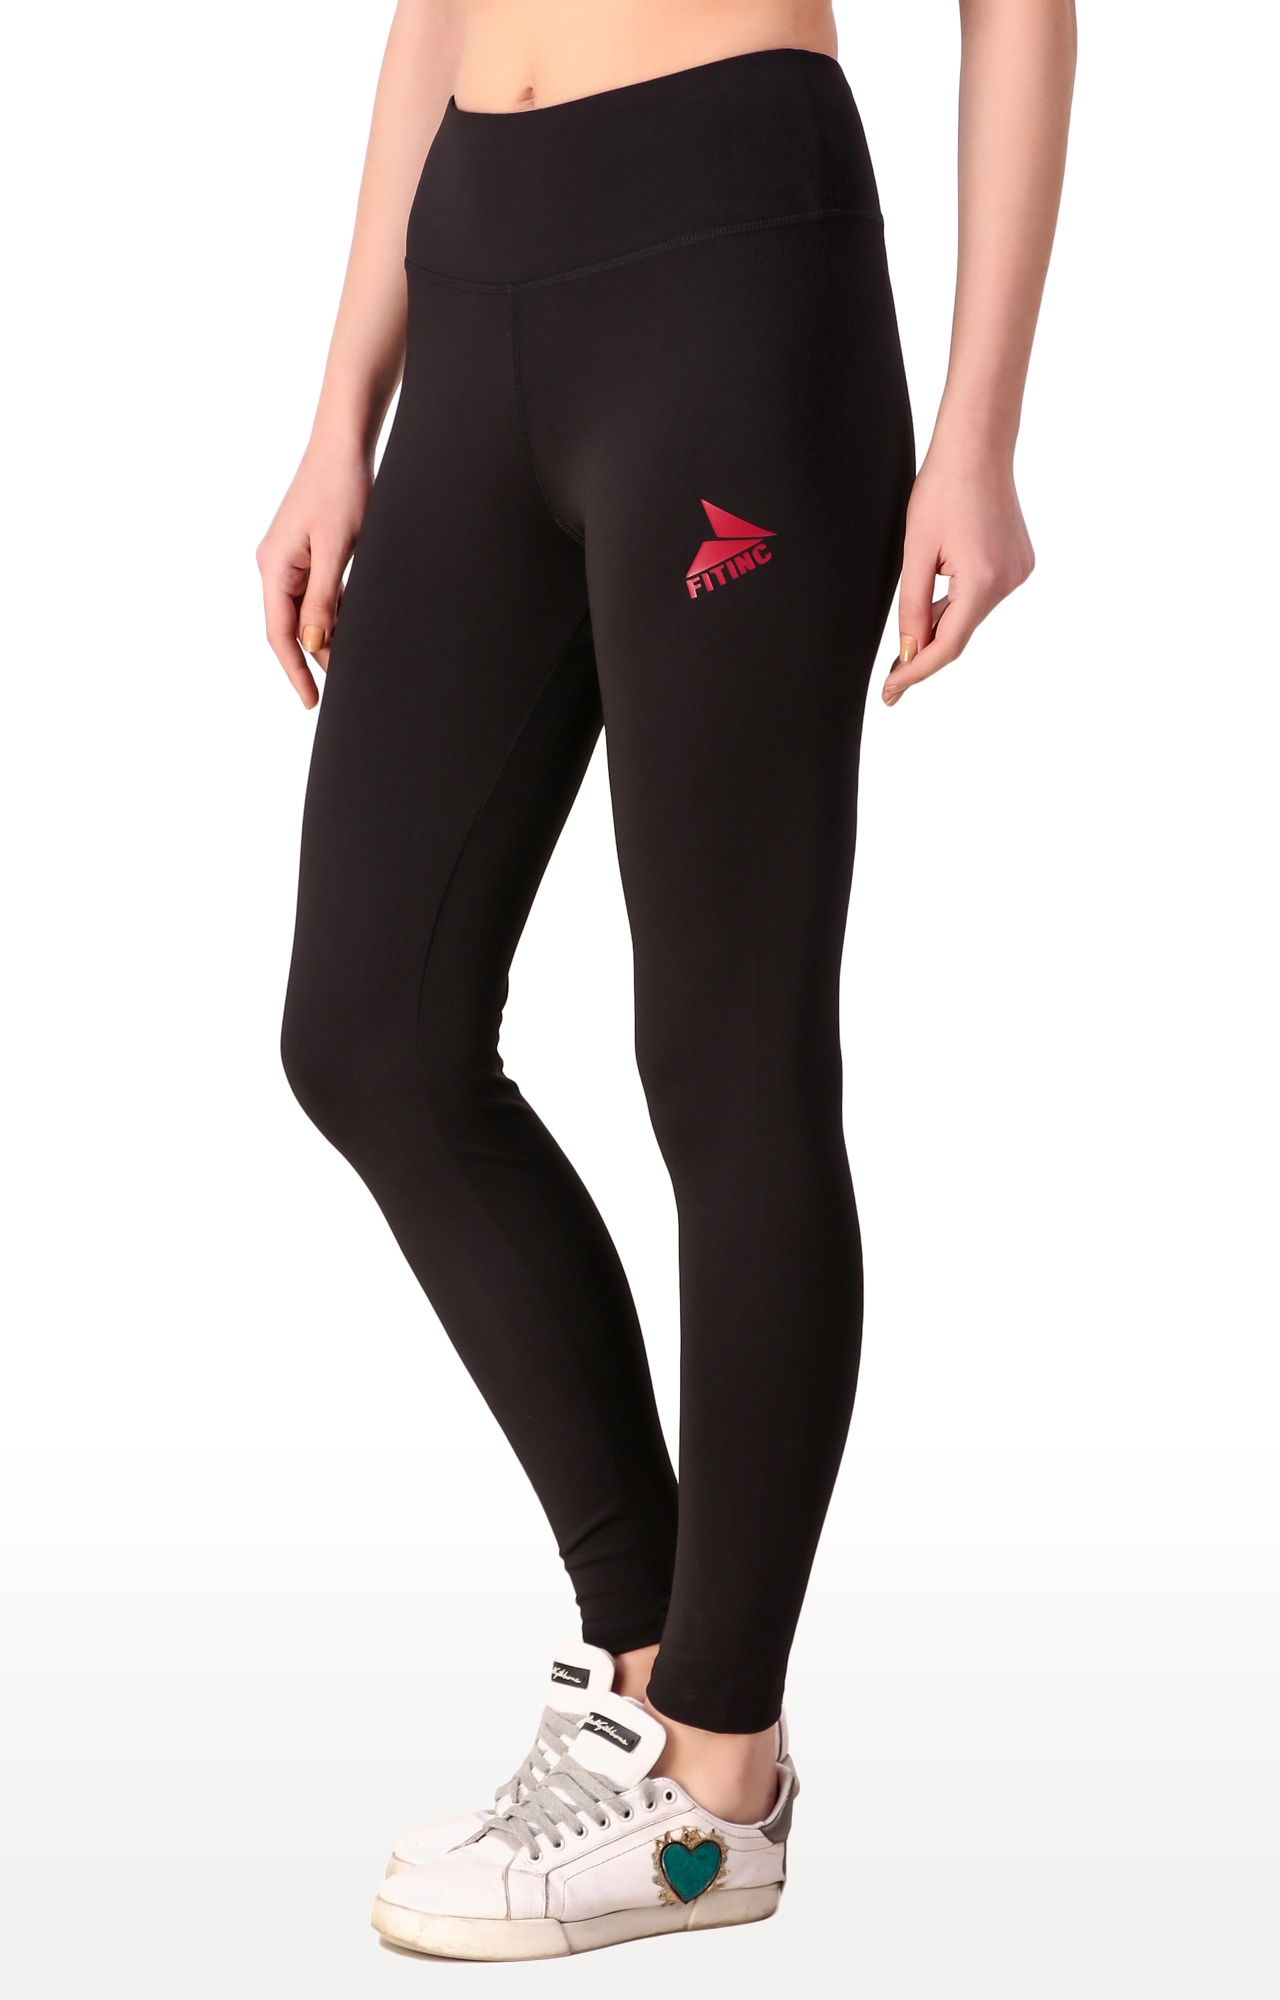 Fitinc | Women's Black Polyester Solid Tights 2